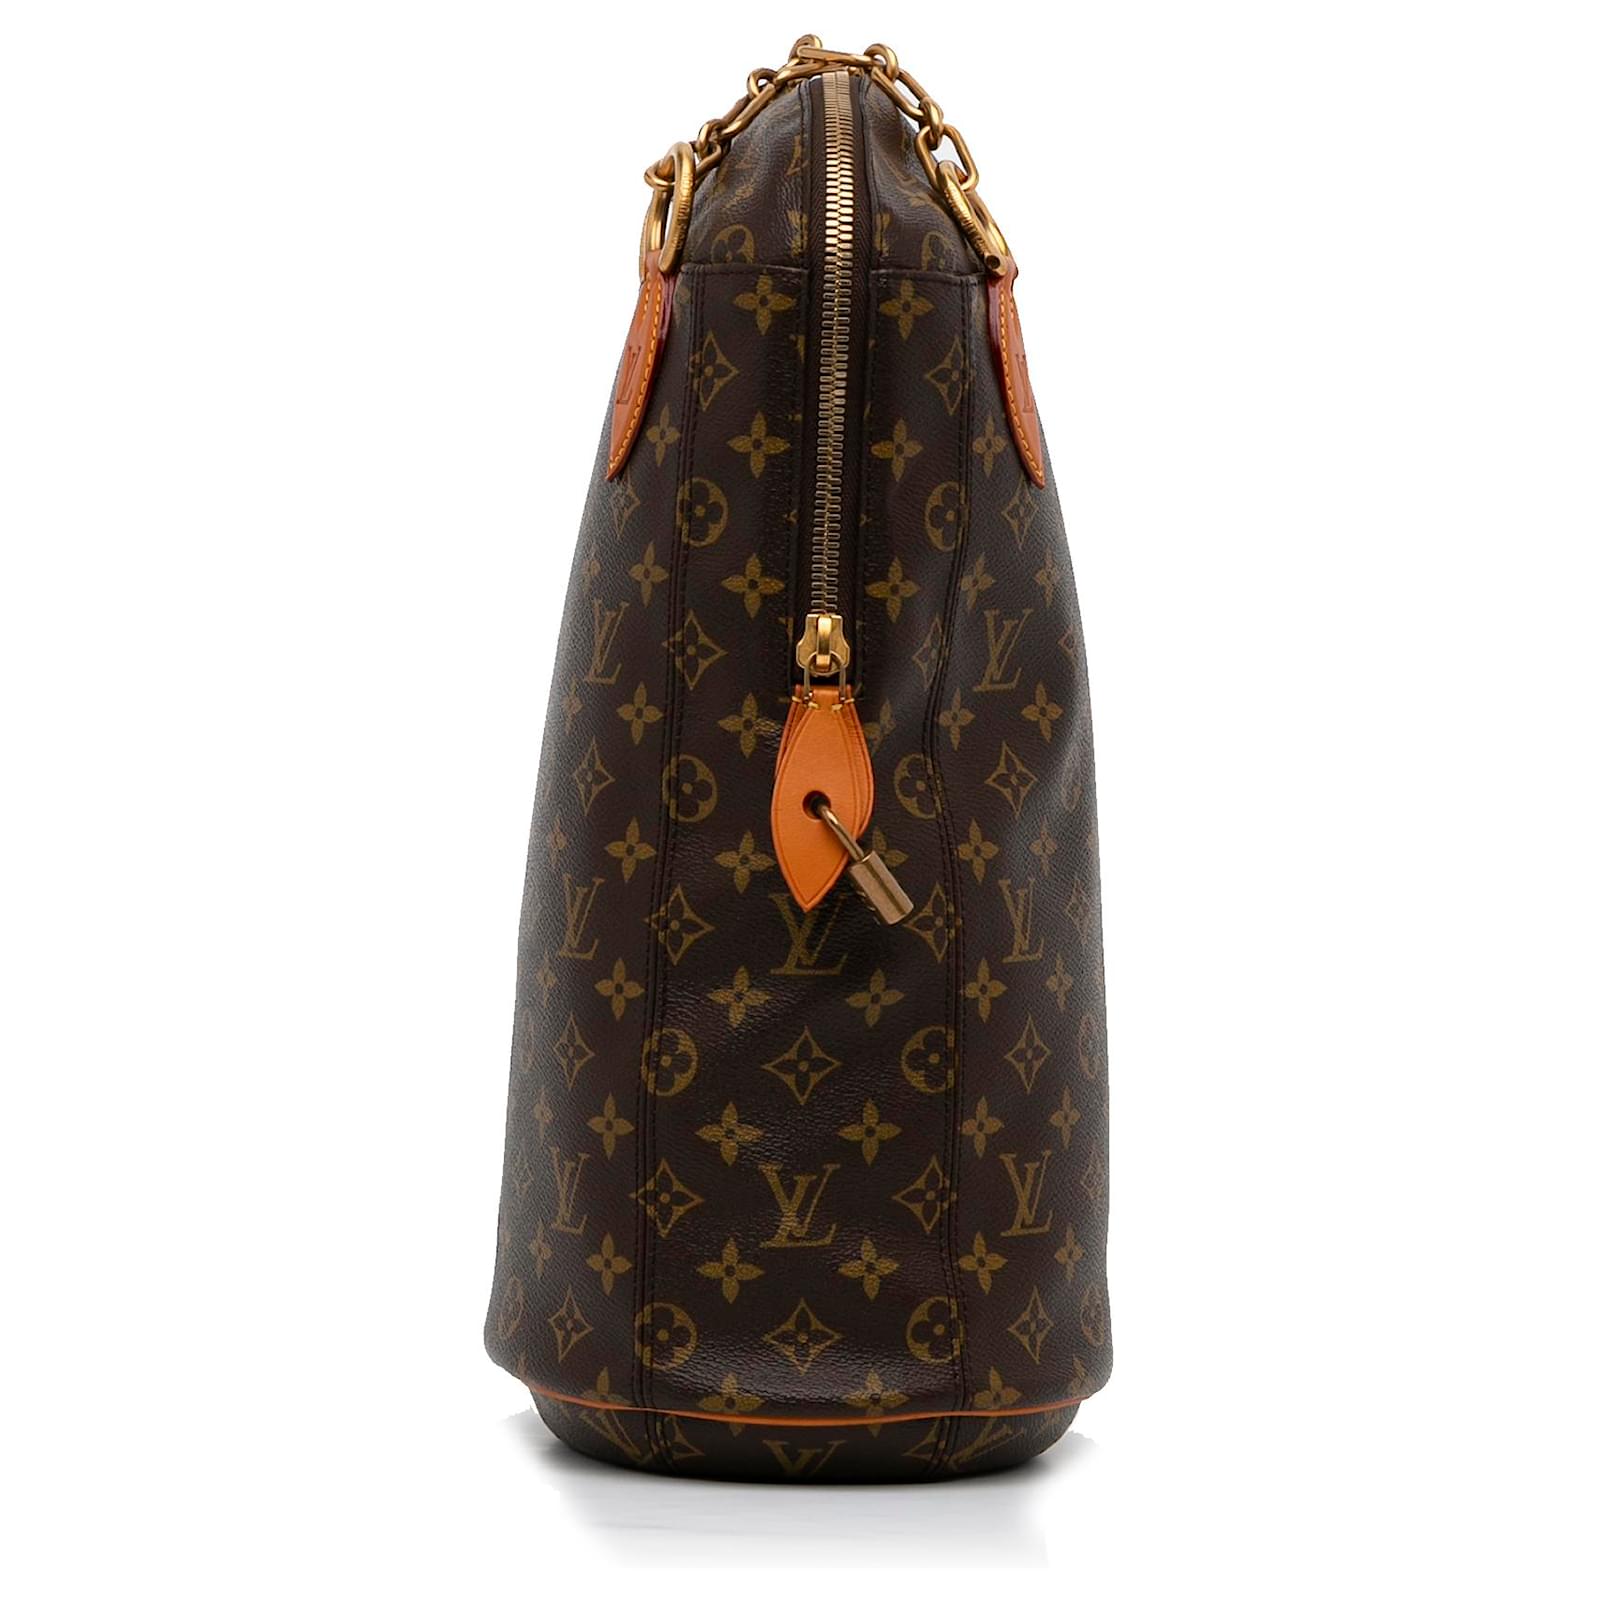 Louis Vuitton: The Iconoclasts